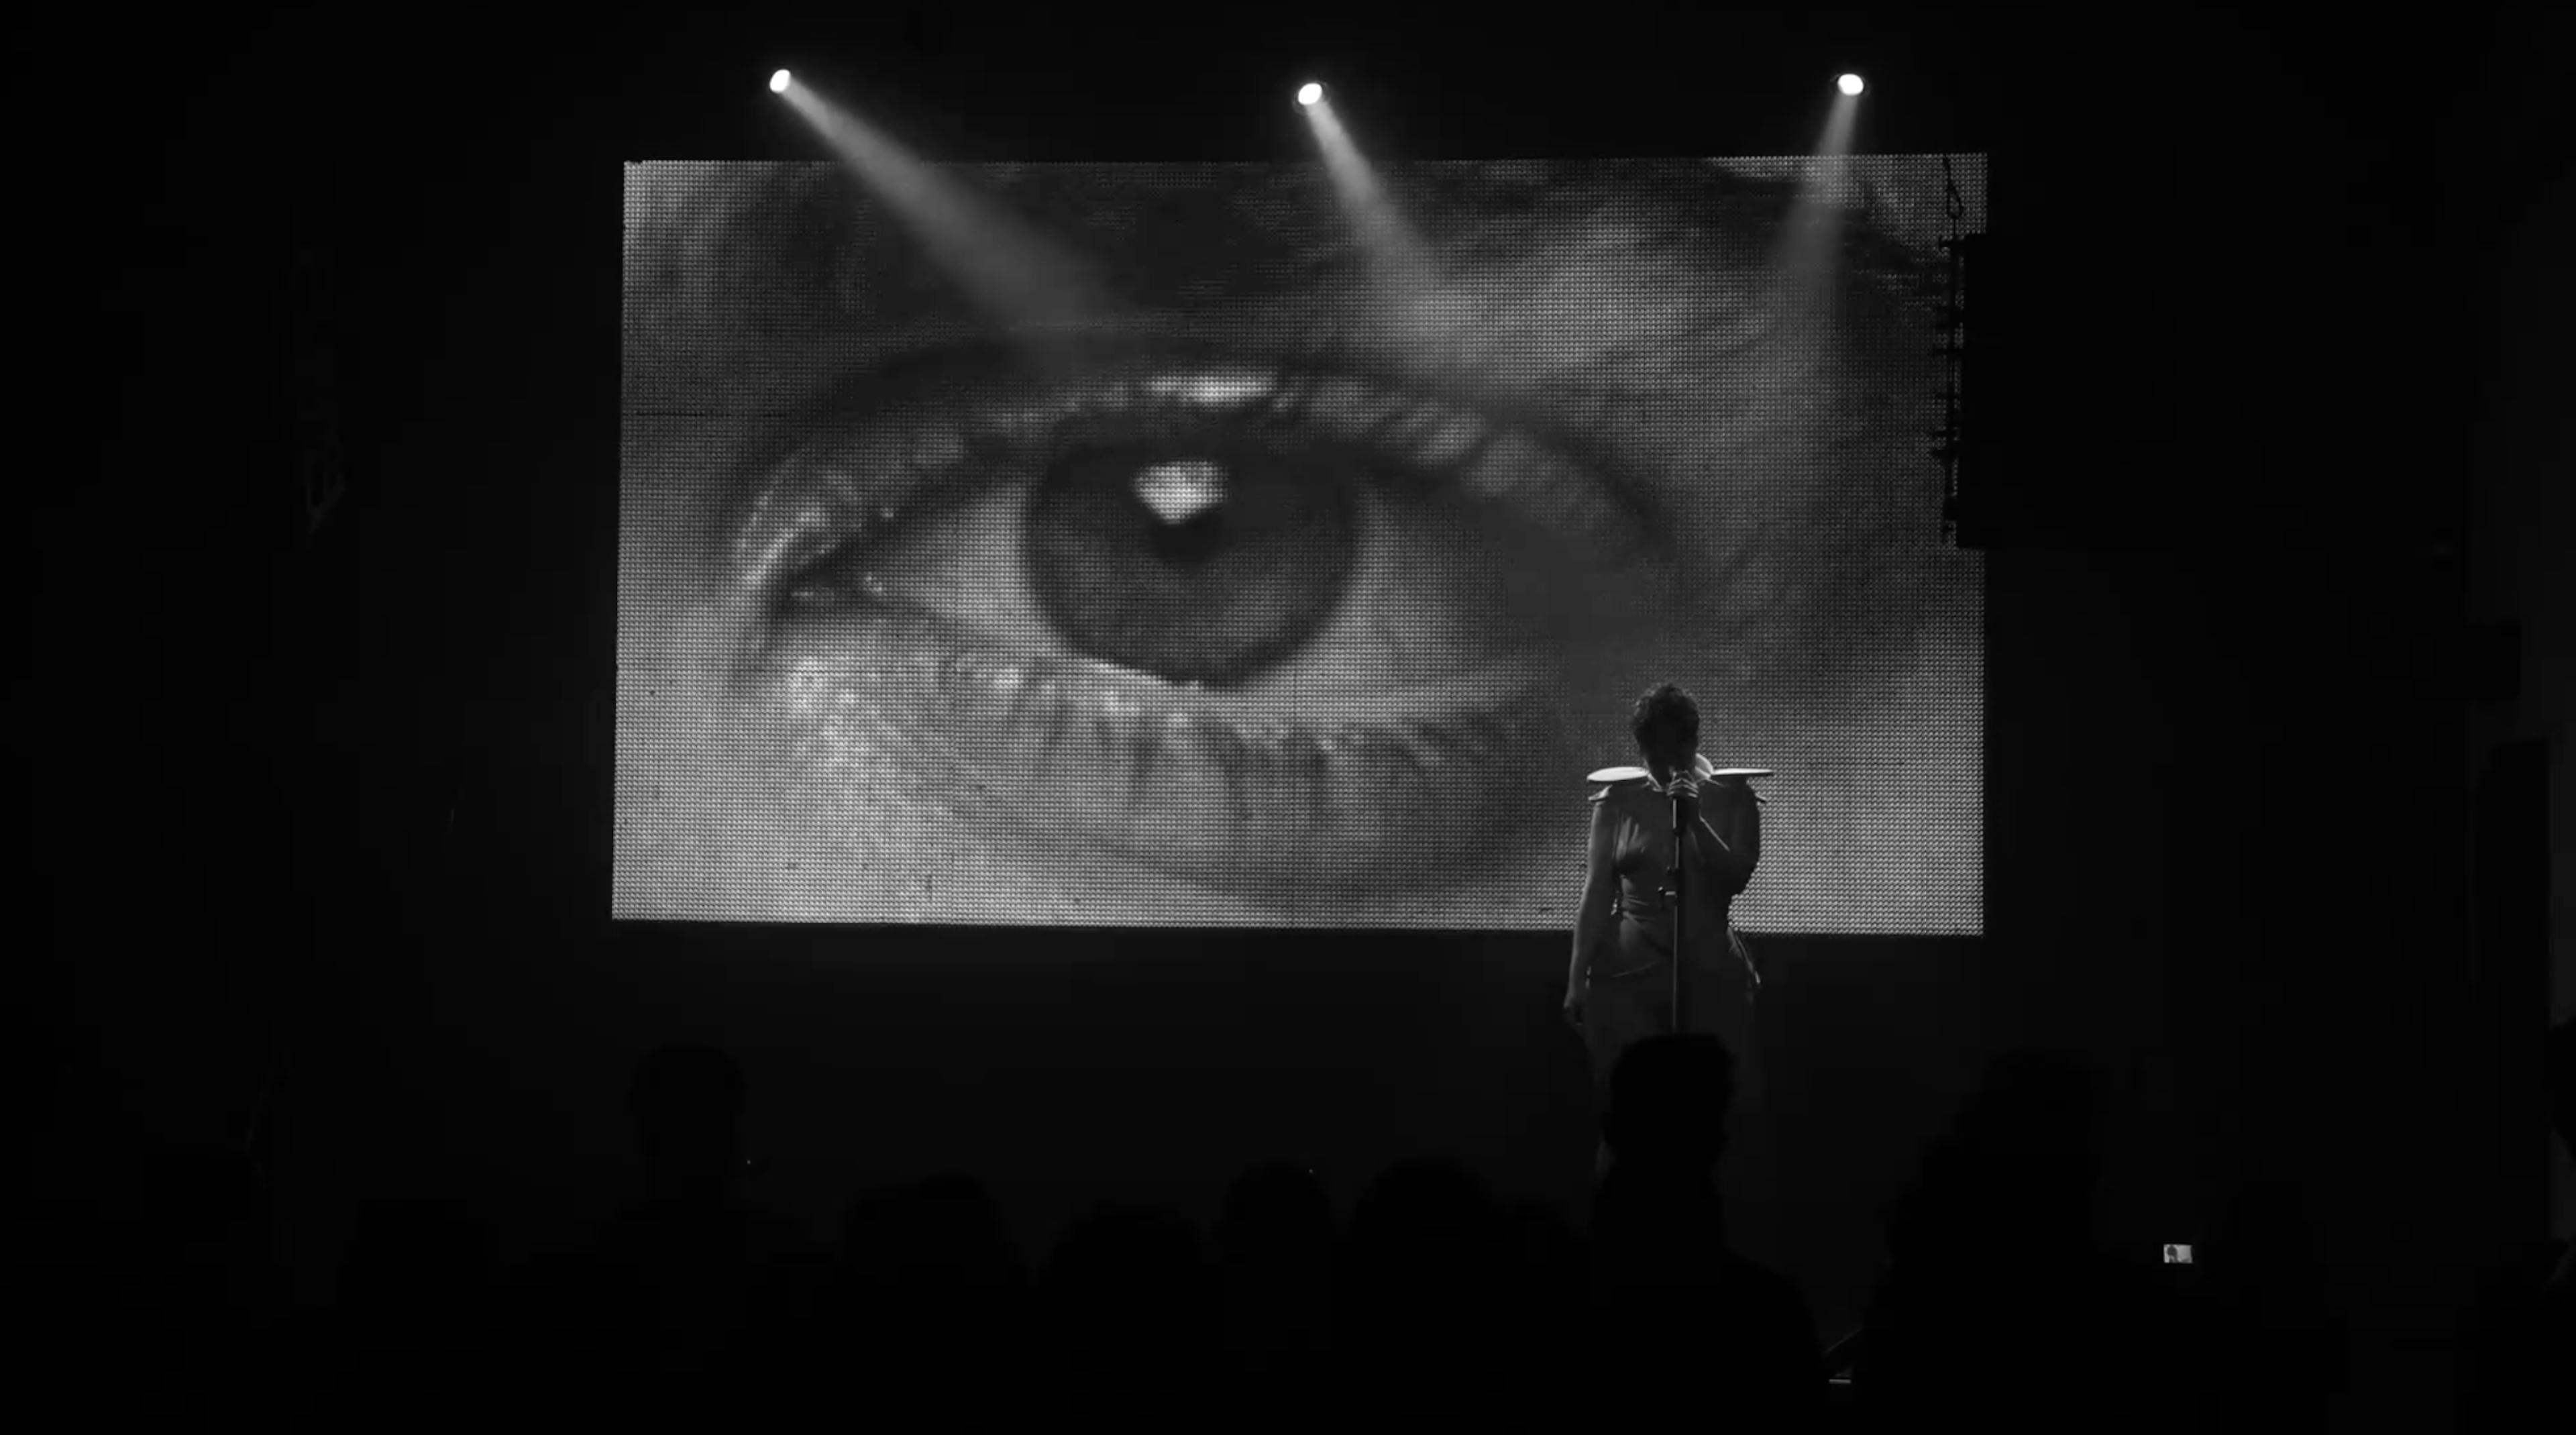 Performer in front of large projected eye